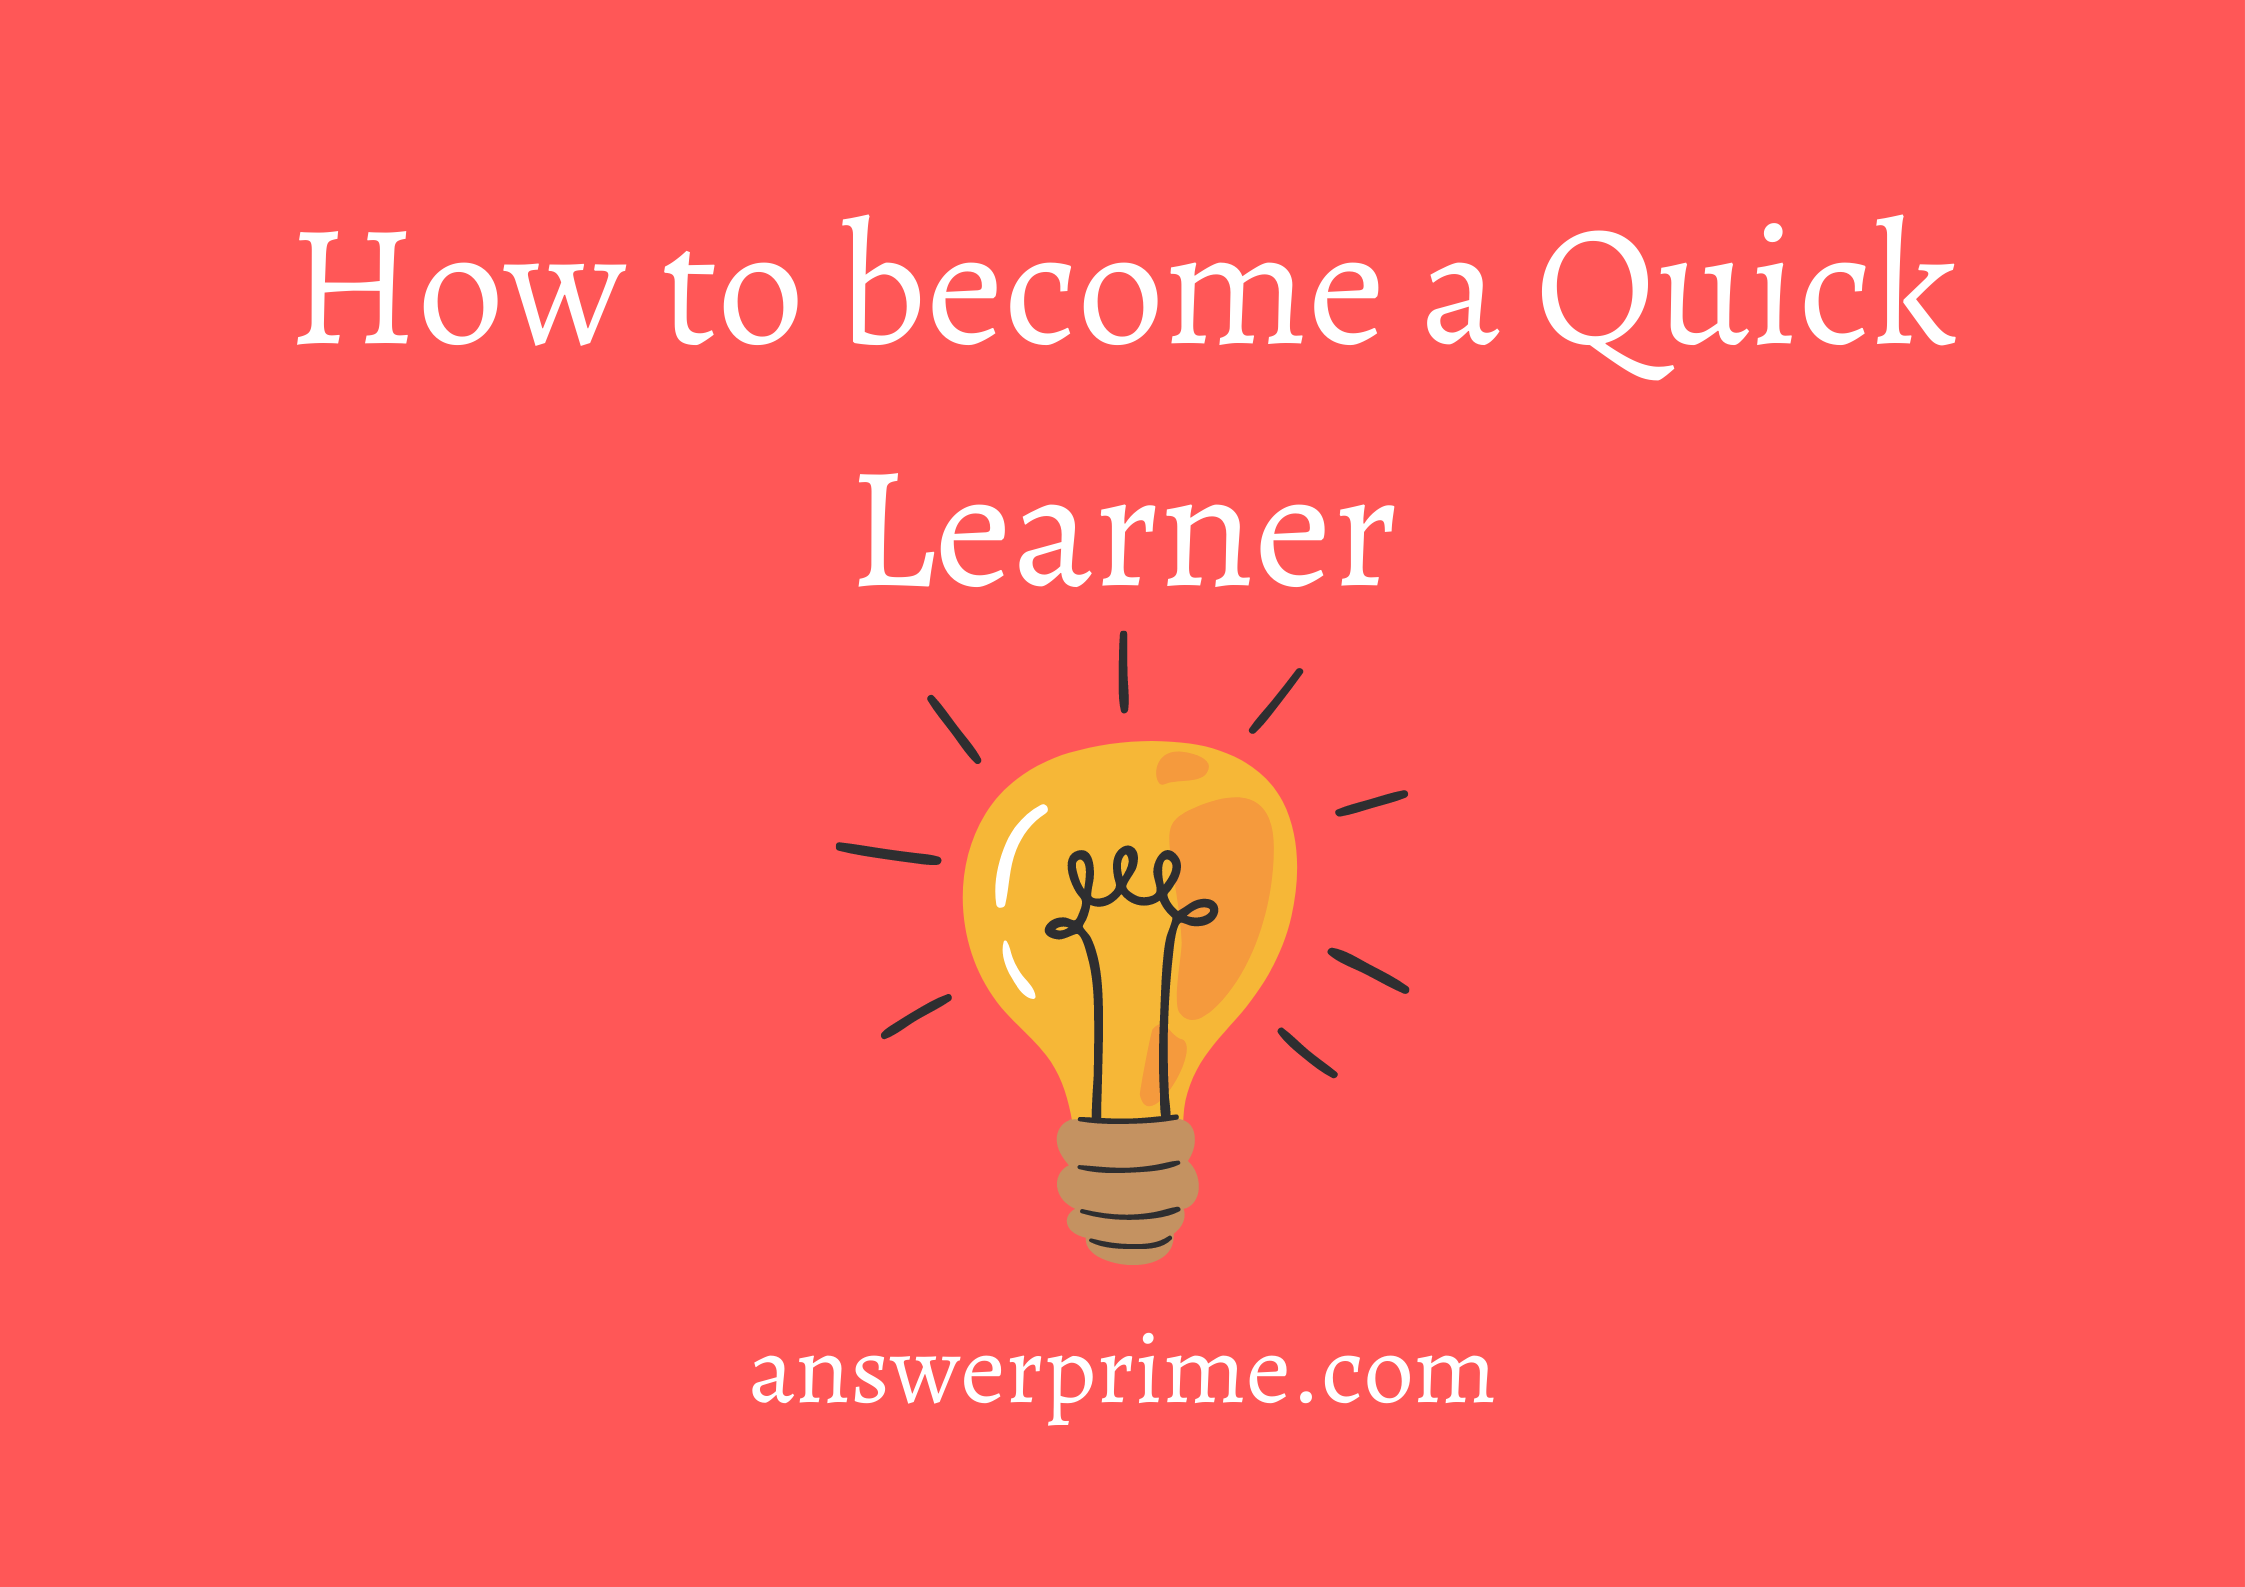 How to become a Quick Learner